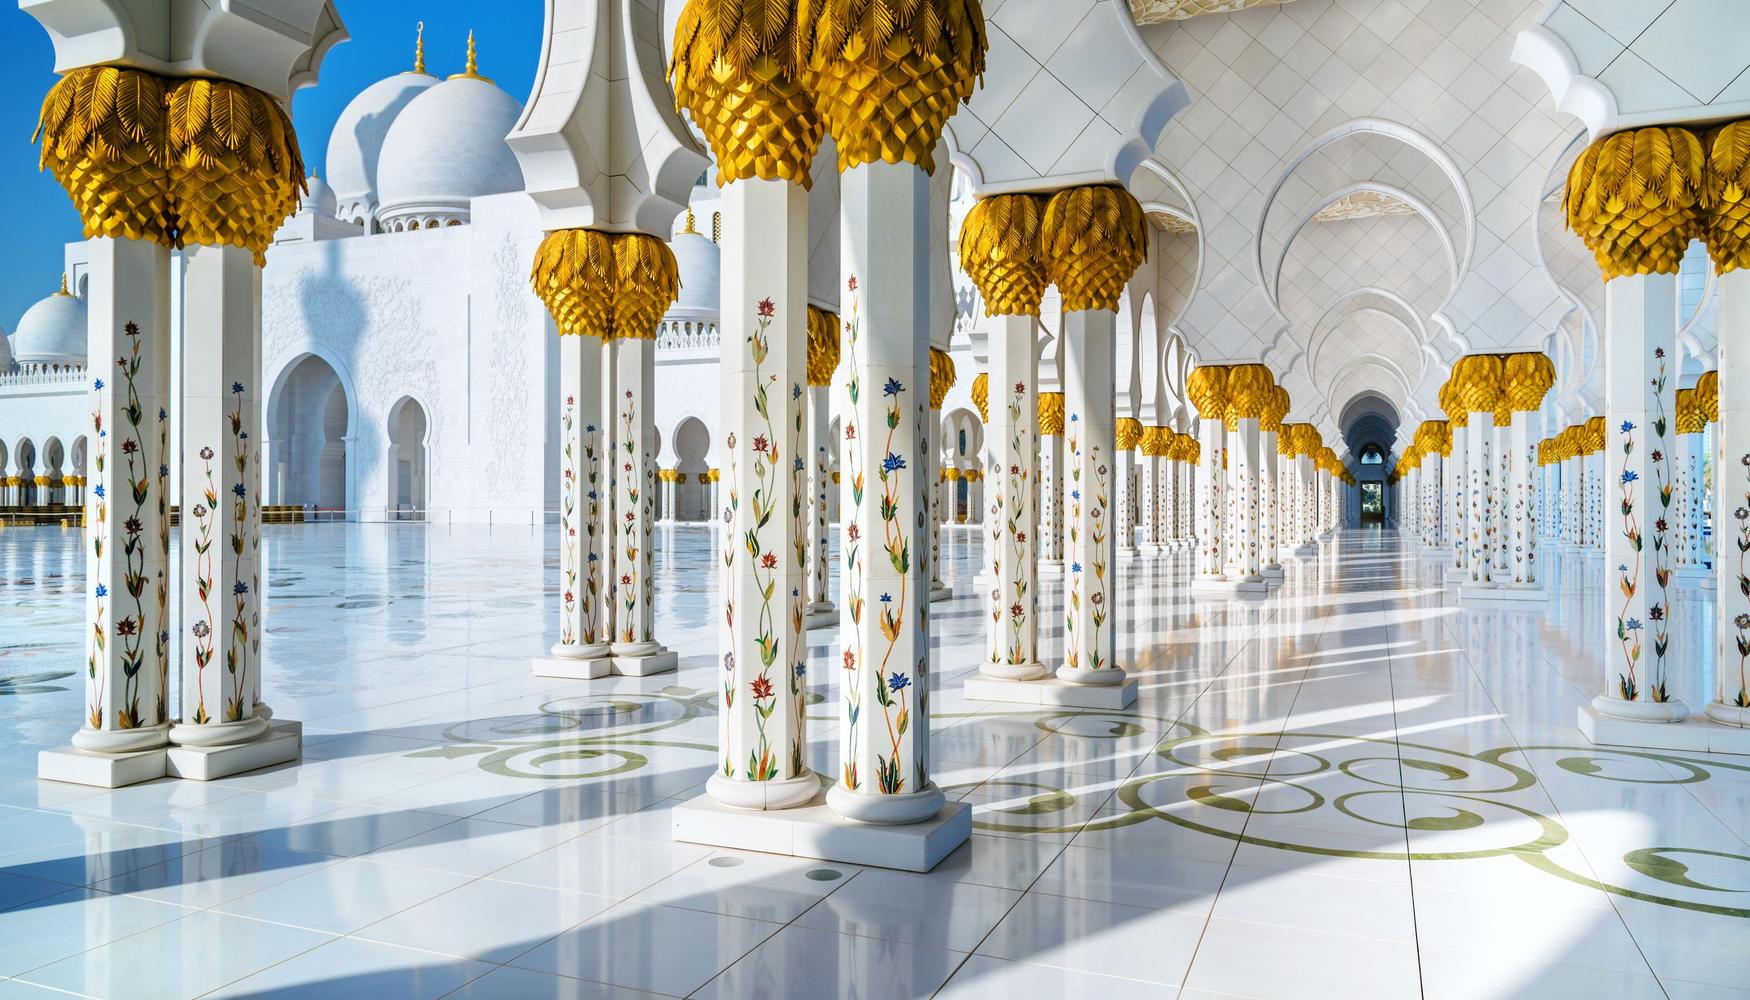 Holidays In Abu Dhabi From £762 - Search Flight+Hotel On Kayak